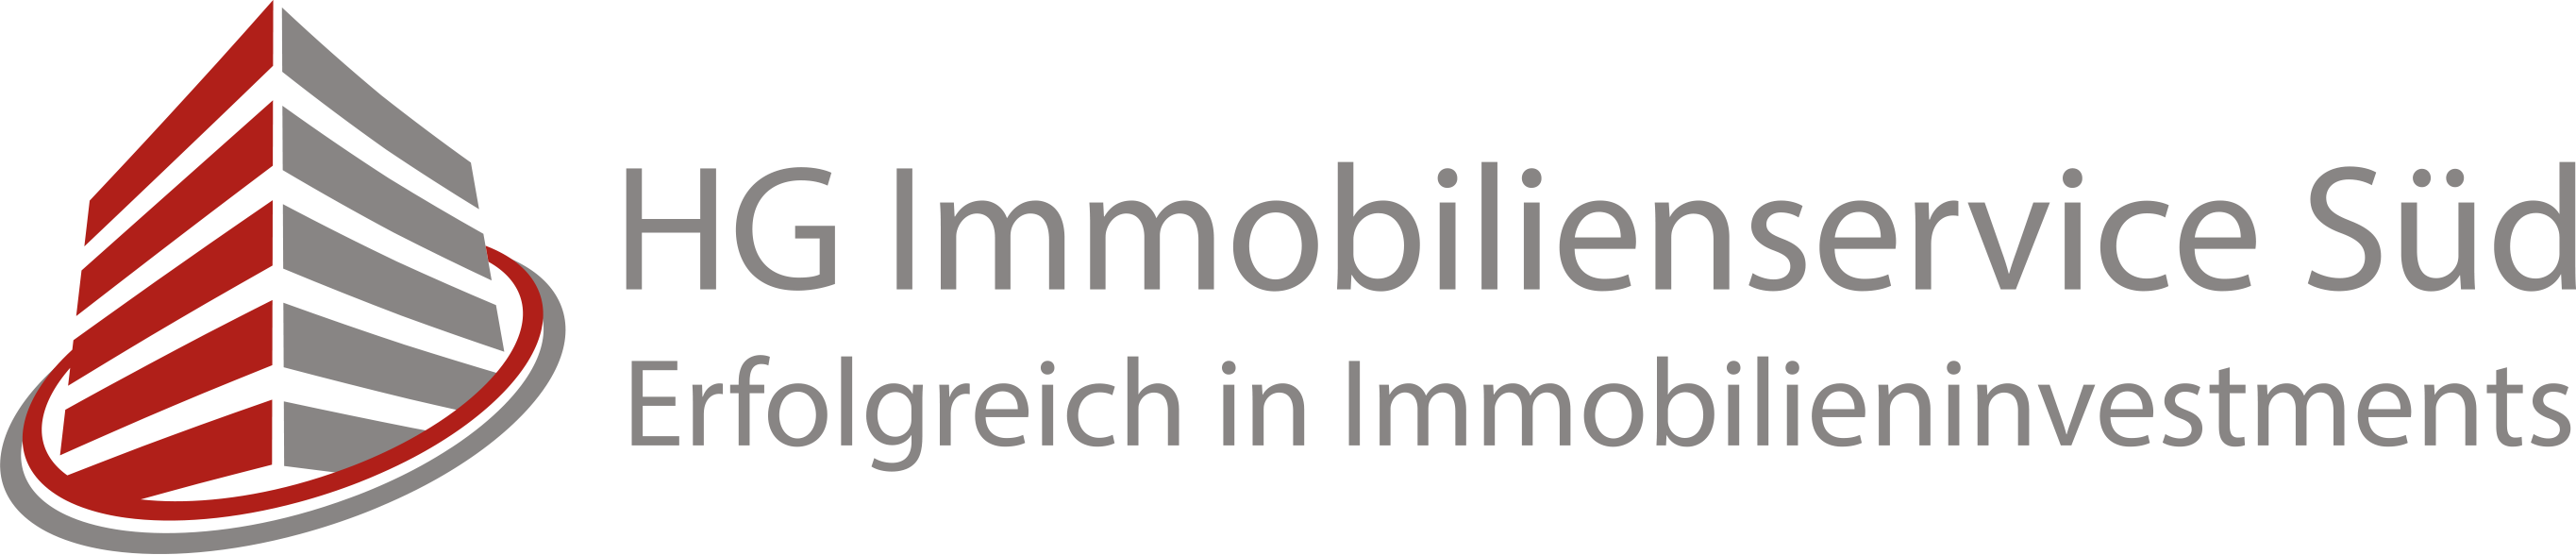 hg immobilienservice sued gmbh logo 253 eng 004